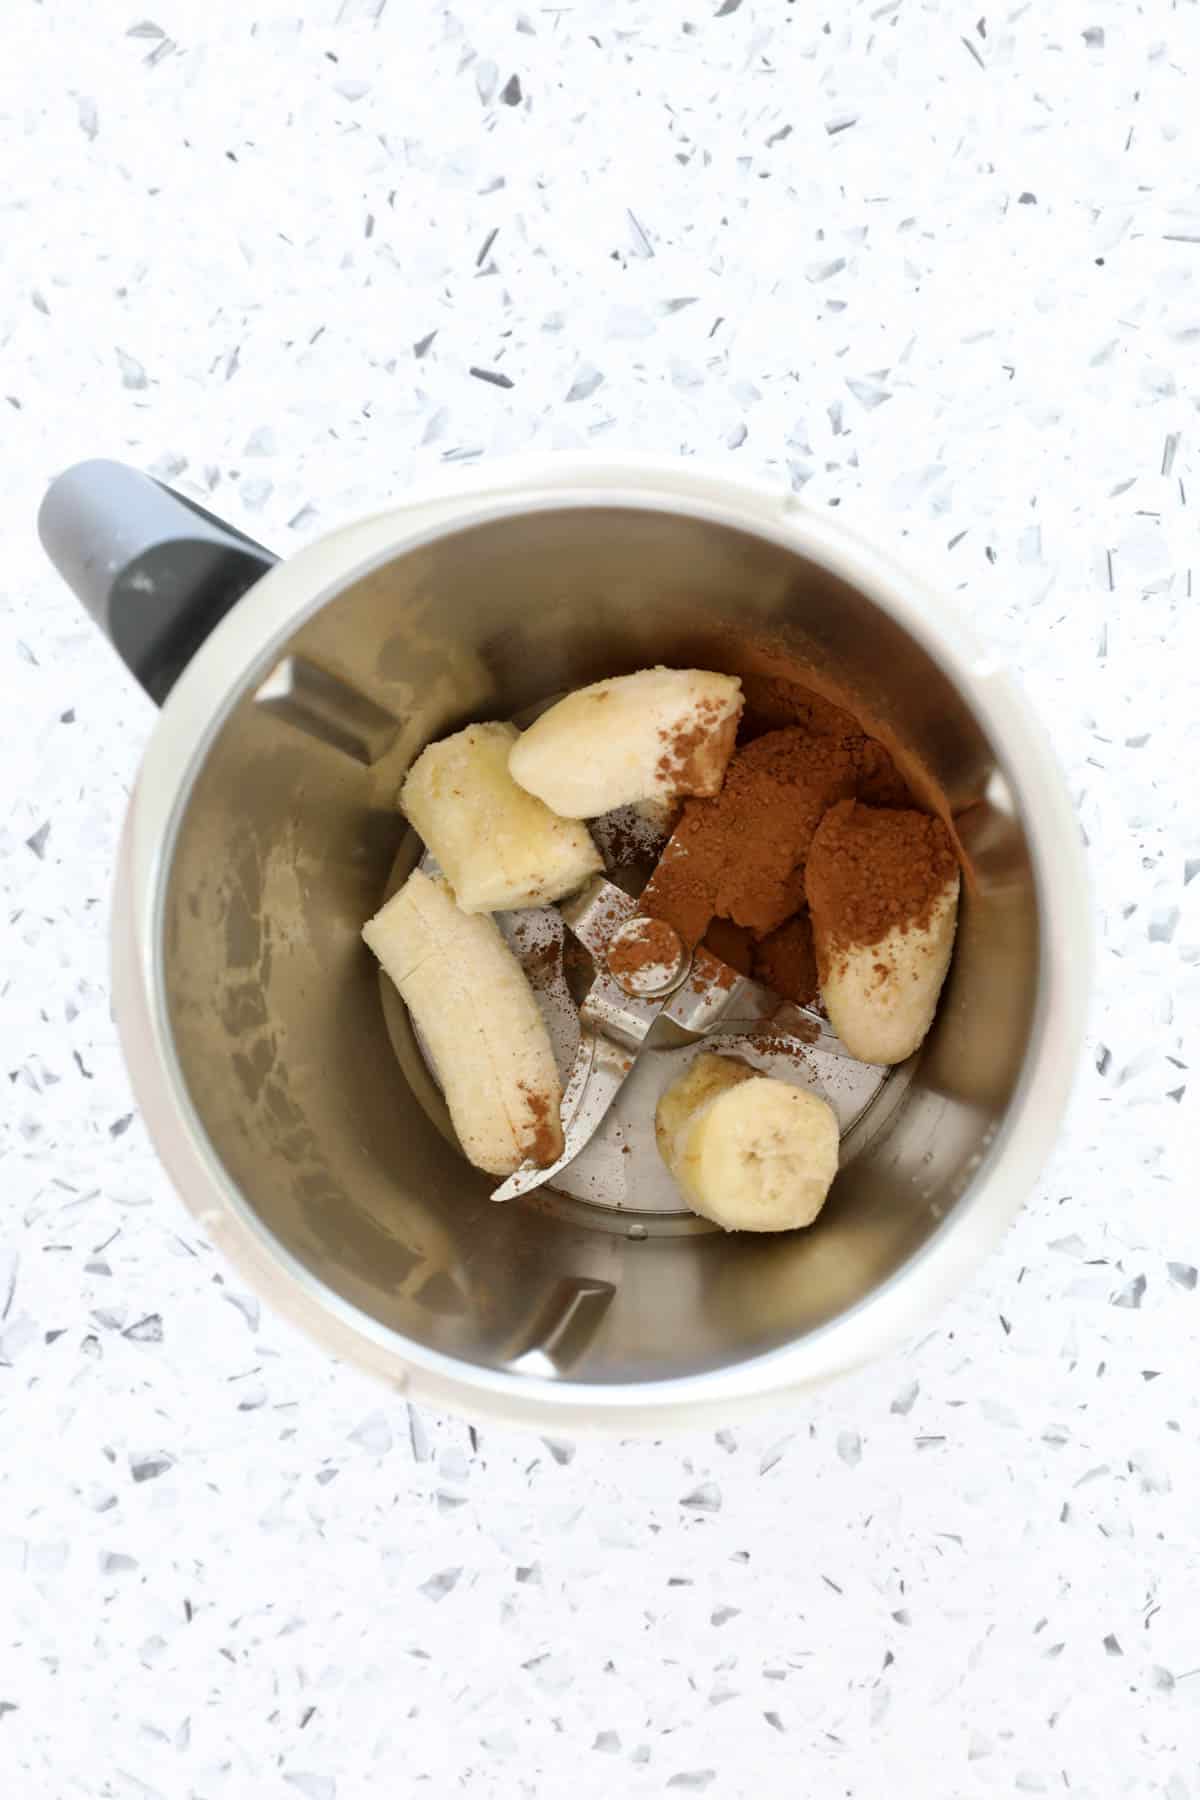 Frozen bananas and cocoa powder in a Thermomix.